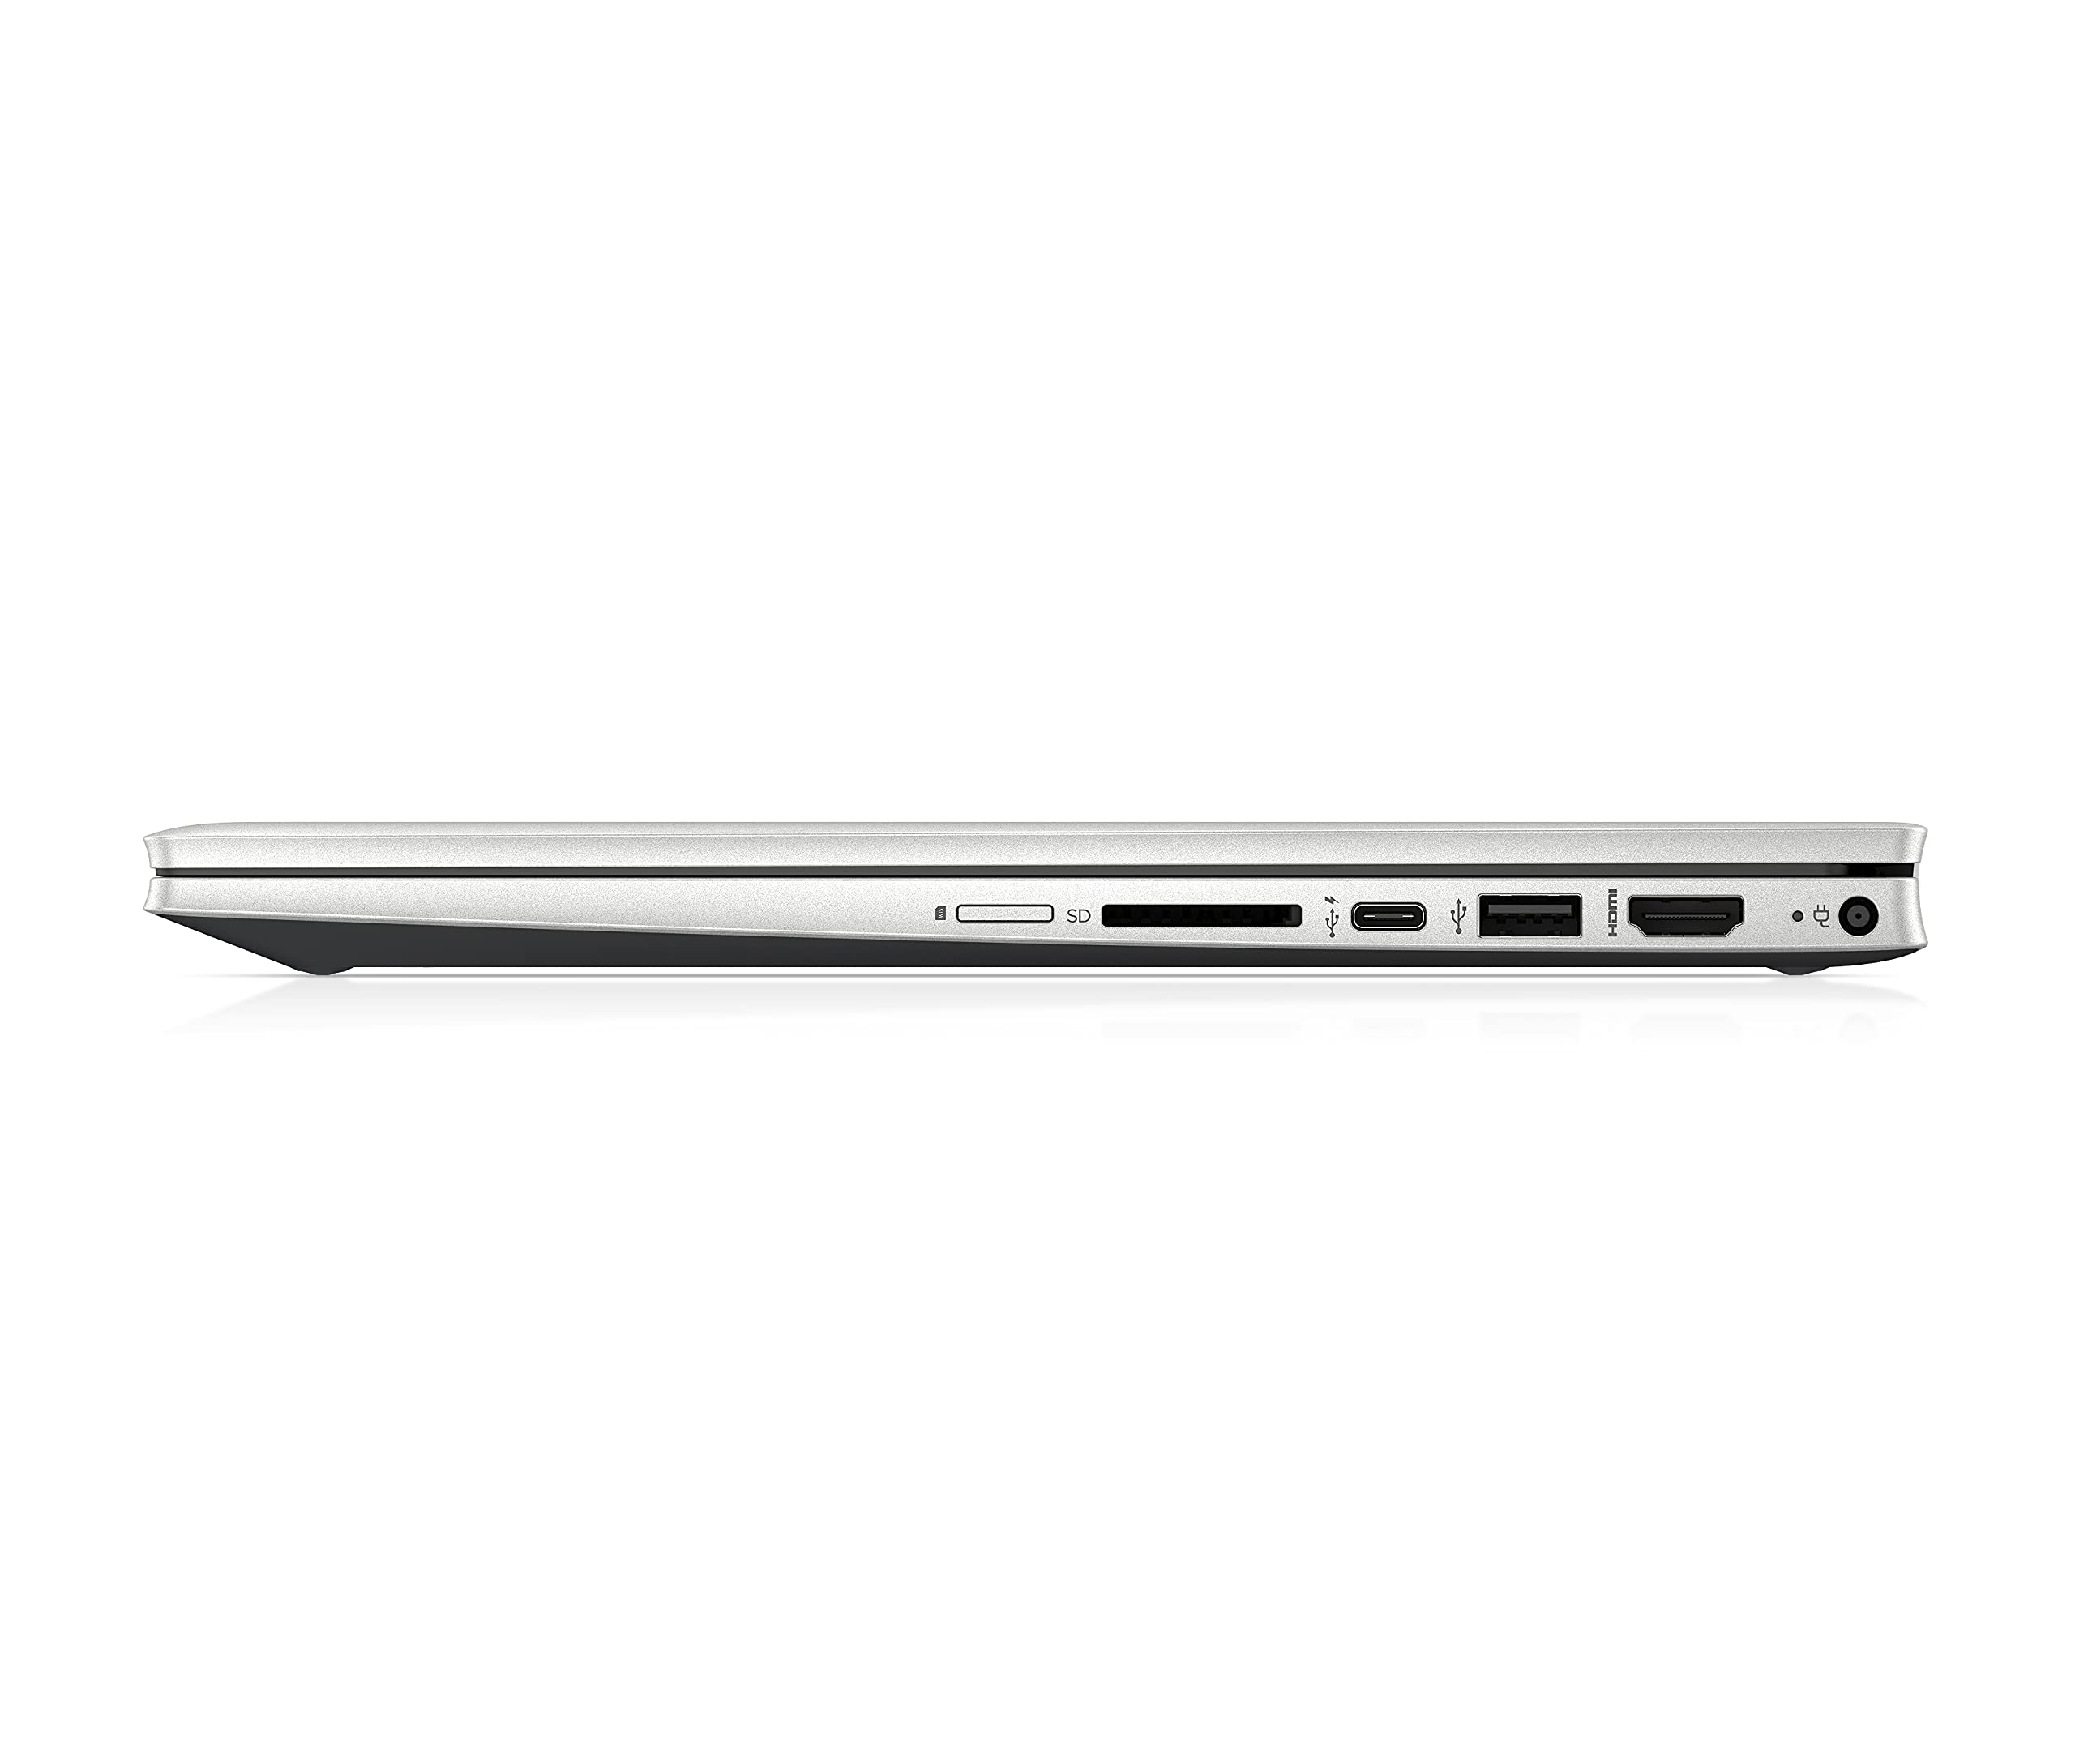 HP 2023 Pavilion x360 14" FHD IPS Touchscreen Premium 2-in-1 Laptop, 11th Gen Intel 4-Core i5-1135G7 Upto 4.2GHz, 8GB RAM, 2TB PCIe SSD, Windows 11 Home + HDMI Cable, Silver